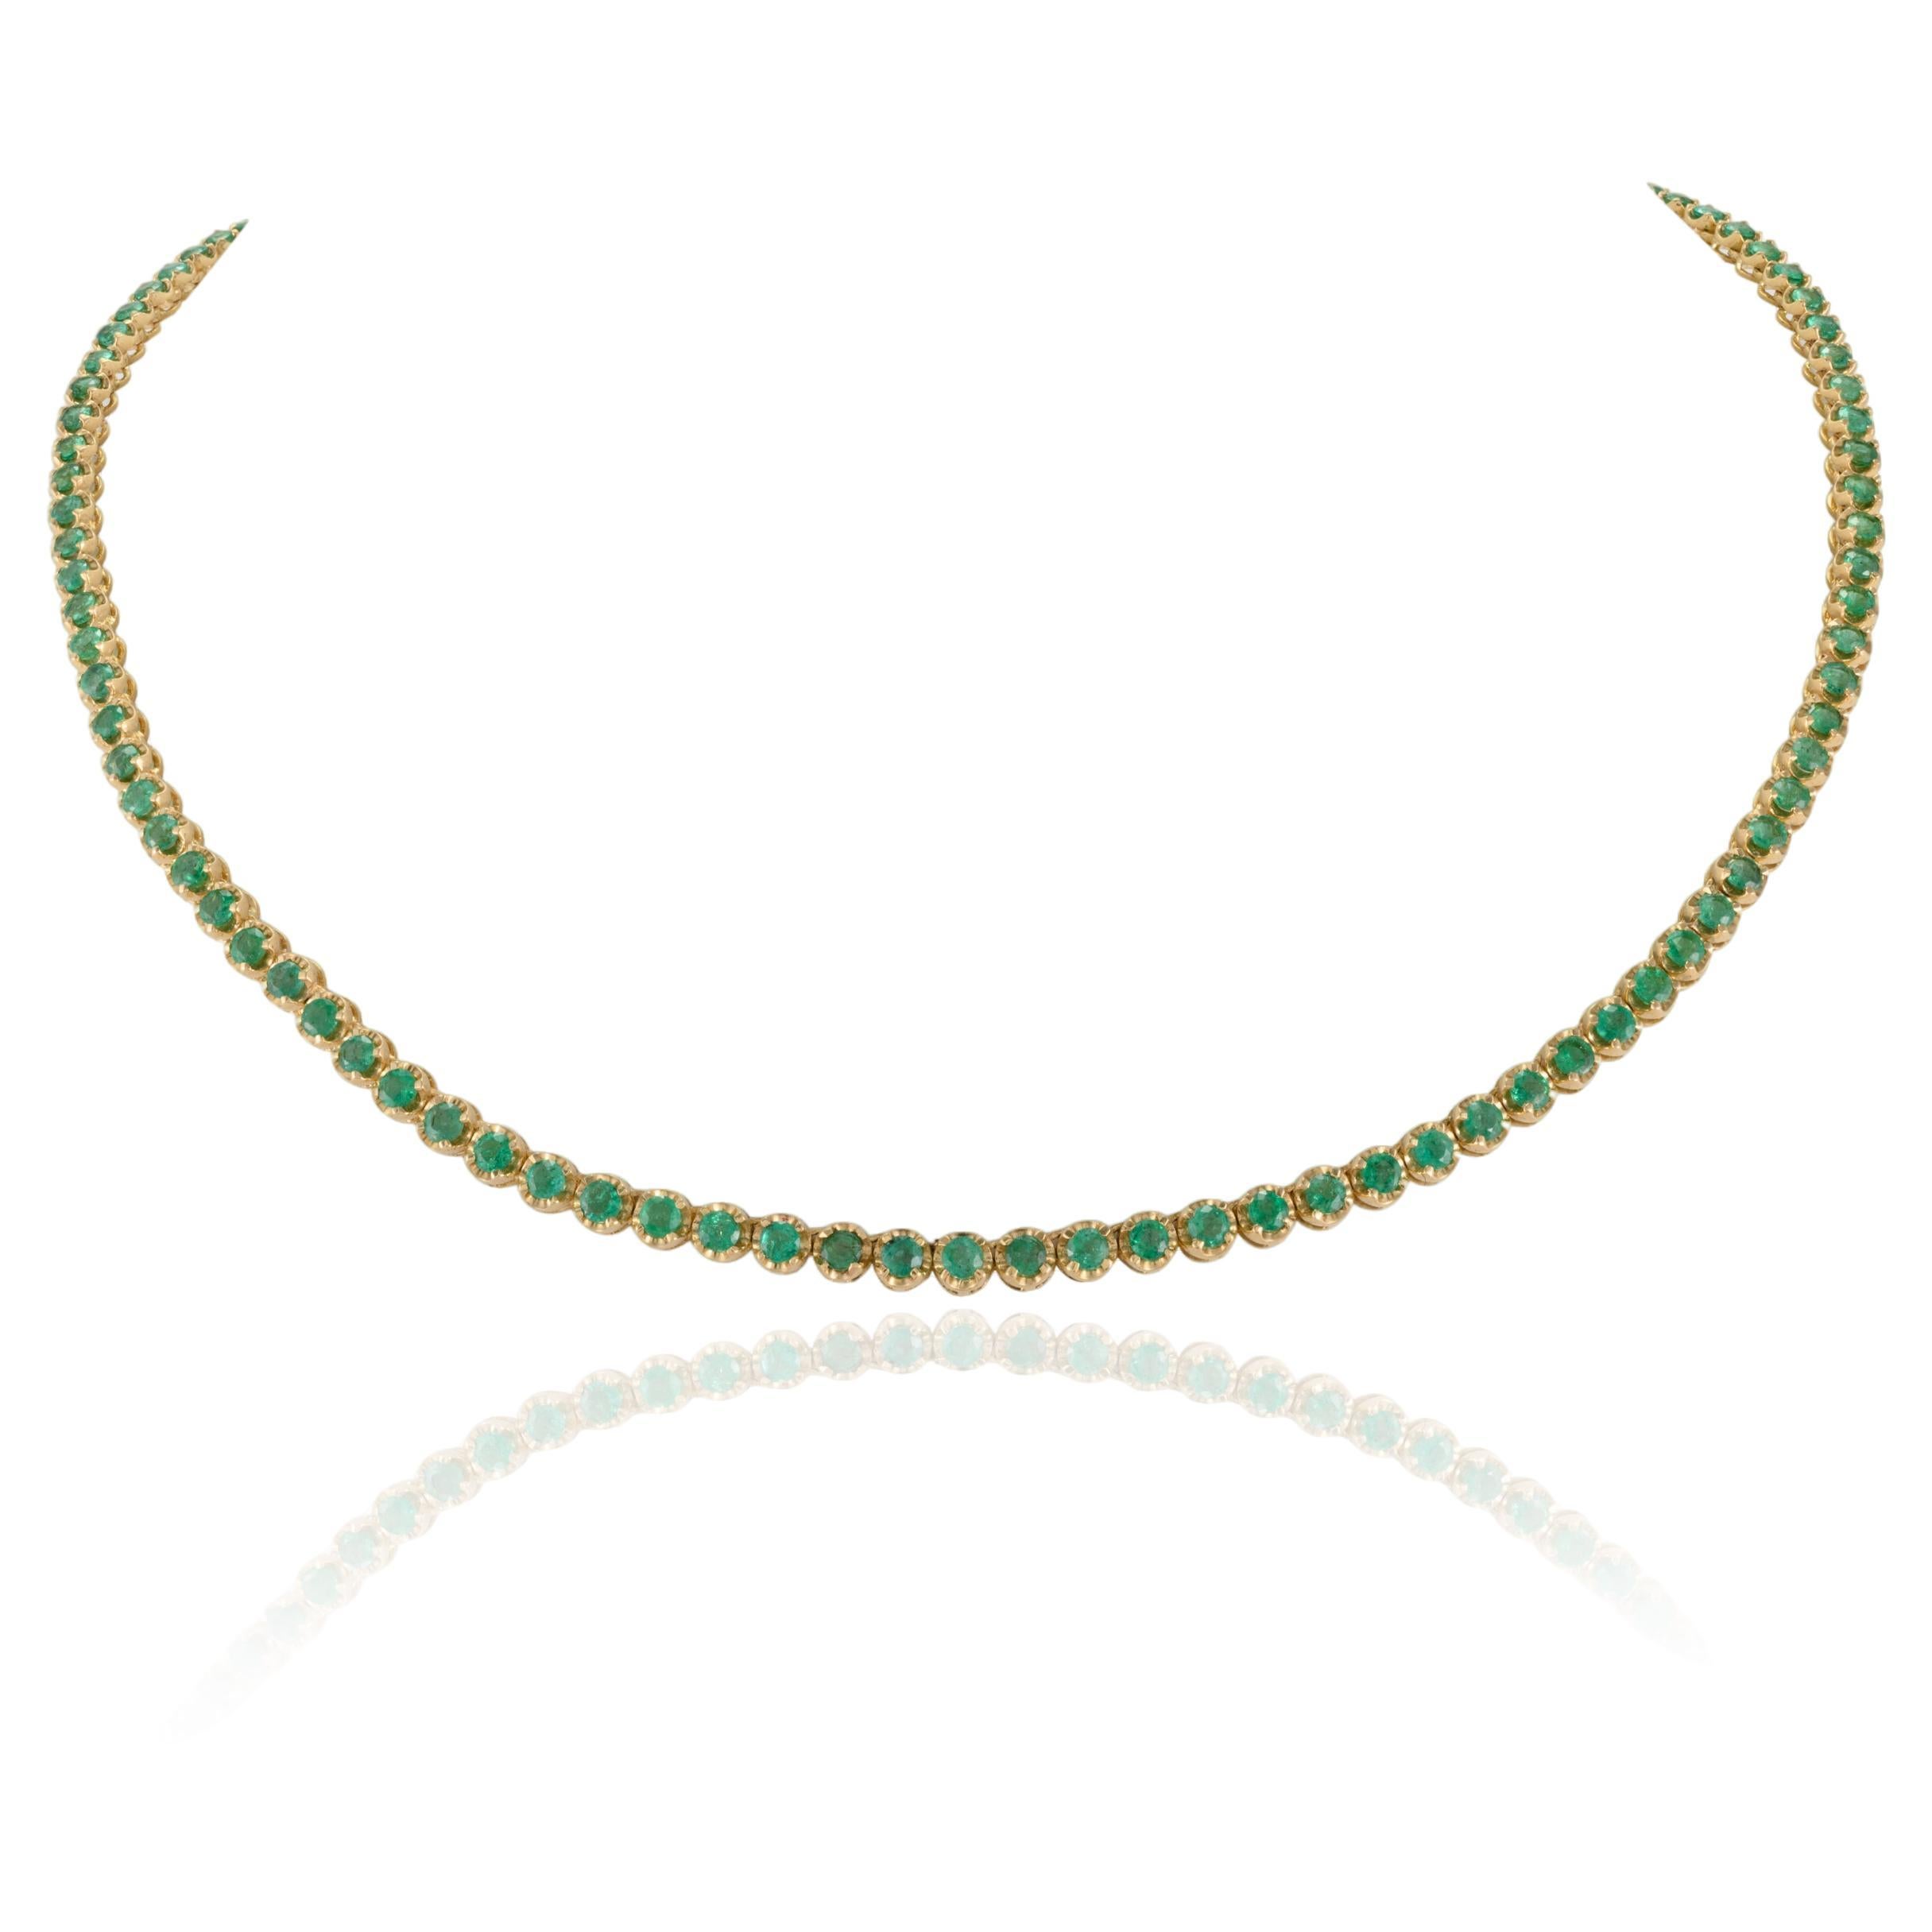 18k Yellow Gold Rare 7.16 CTW Round Cut Emerald Tennis Necklace Gift for Grandma